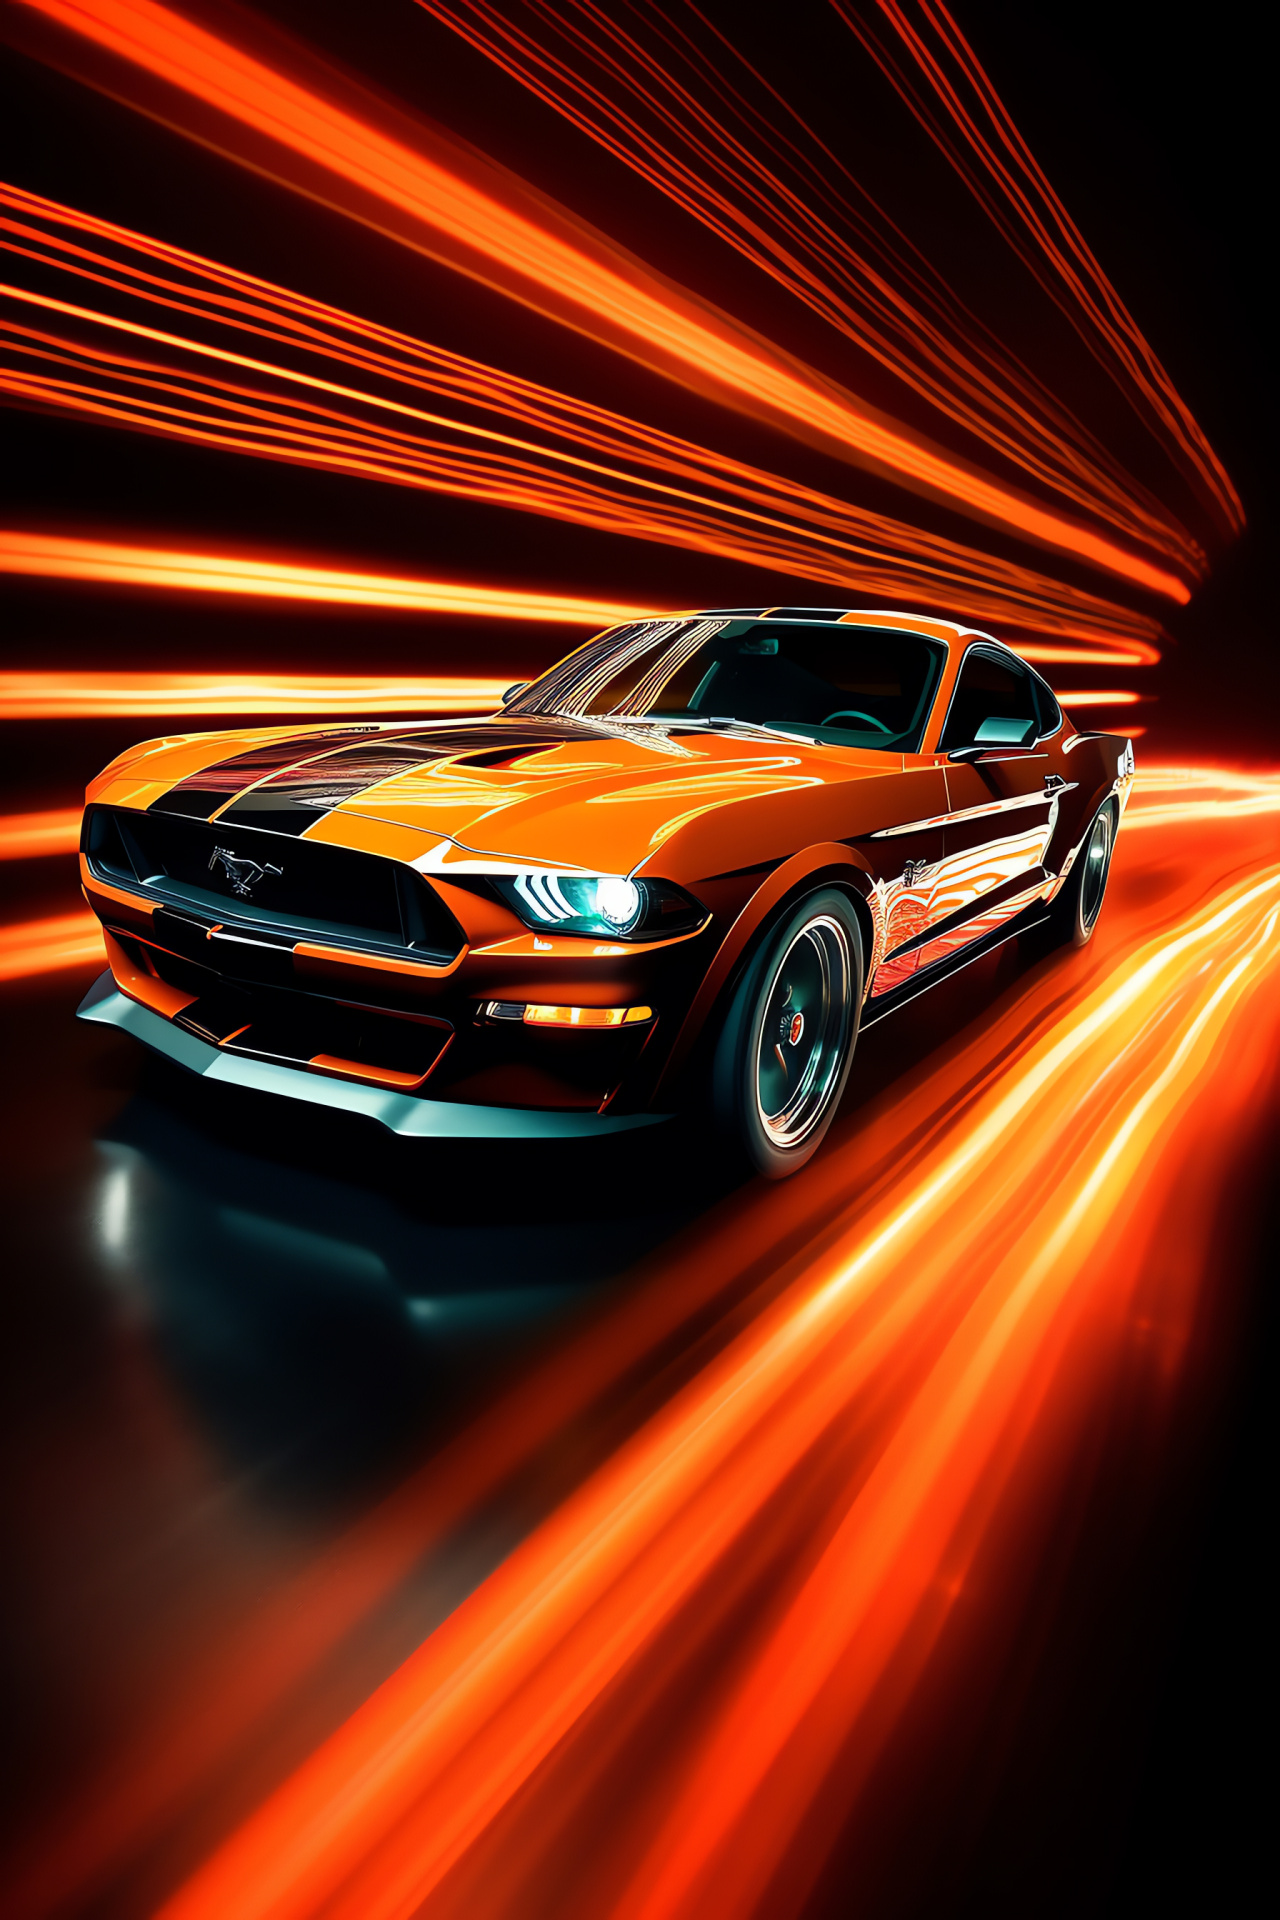 Ford Mustang showcase, Dynamic auto lines, Mustang presence, Aggressive styling, Automotive design, HD Phone Image